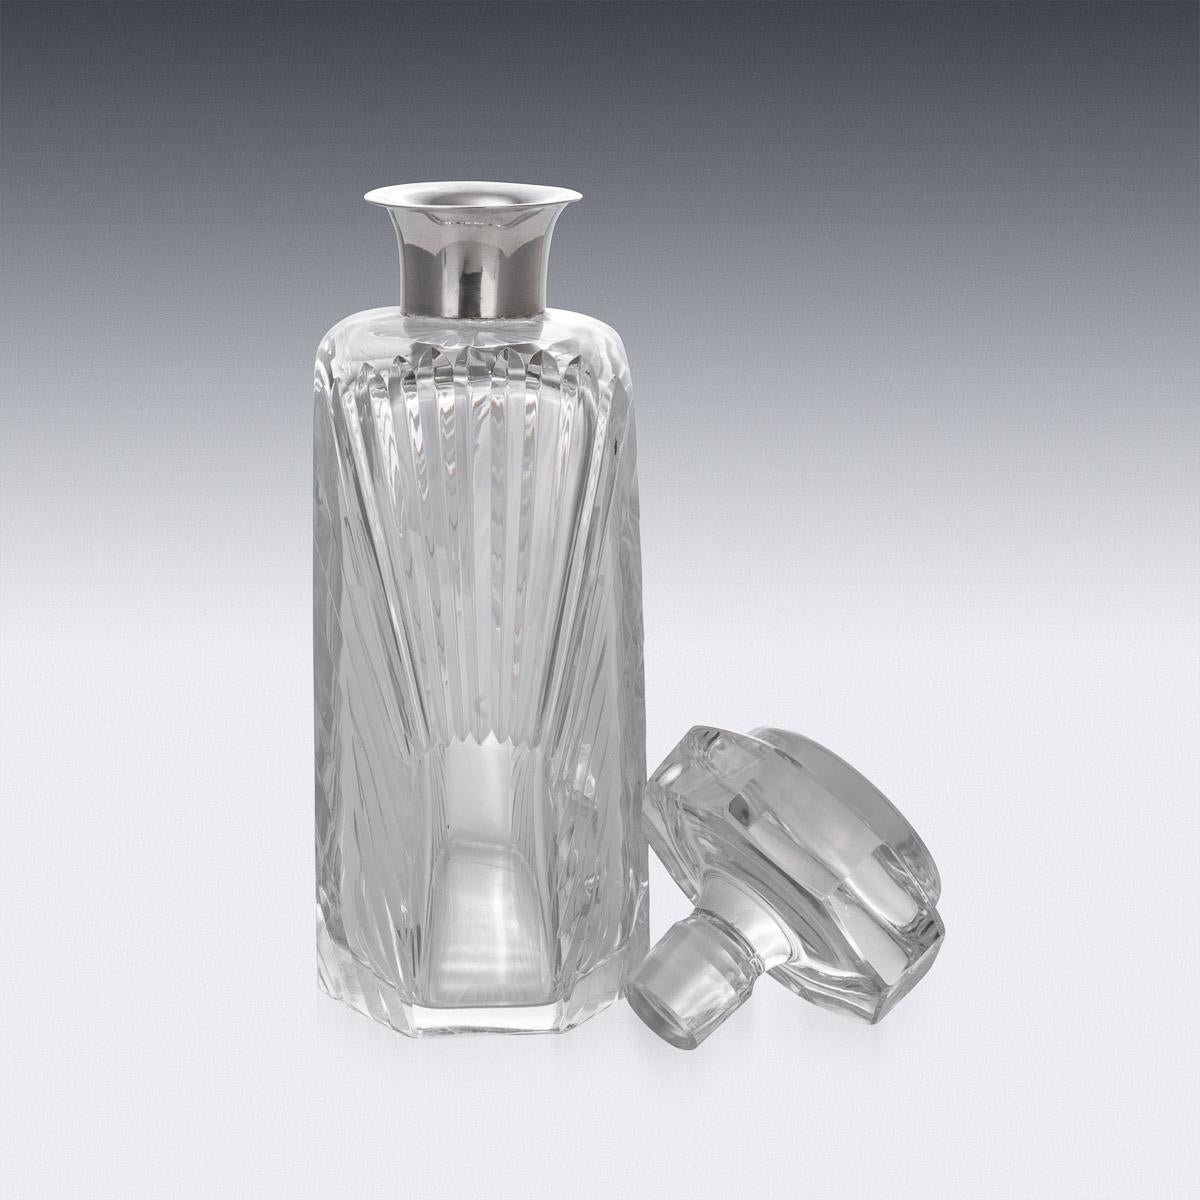 20th Century English Art Deco Solid Silver & Cut Glass Decanter, c.1935 For Sale 2